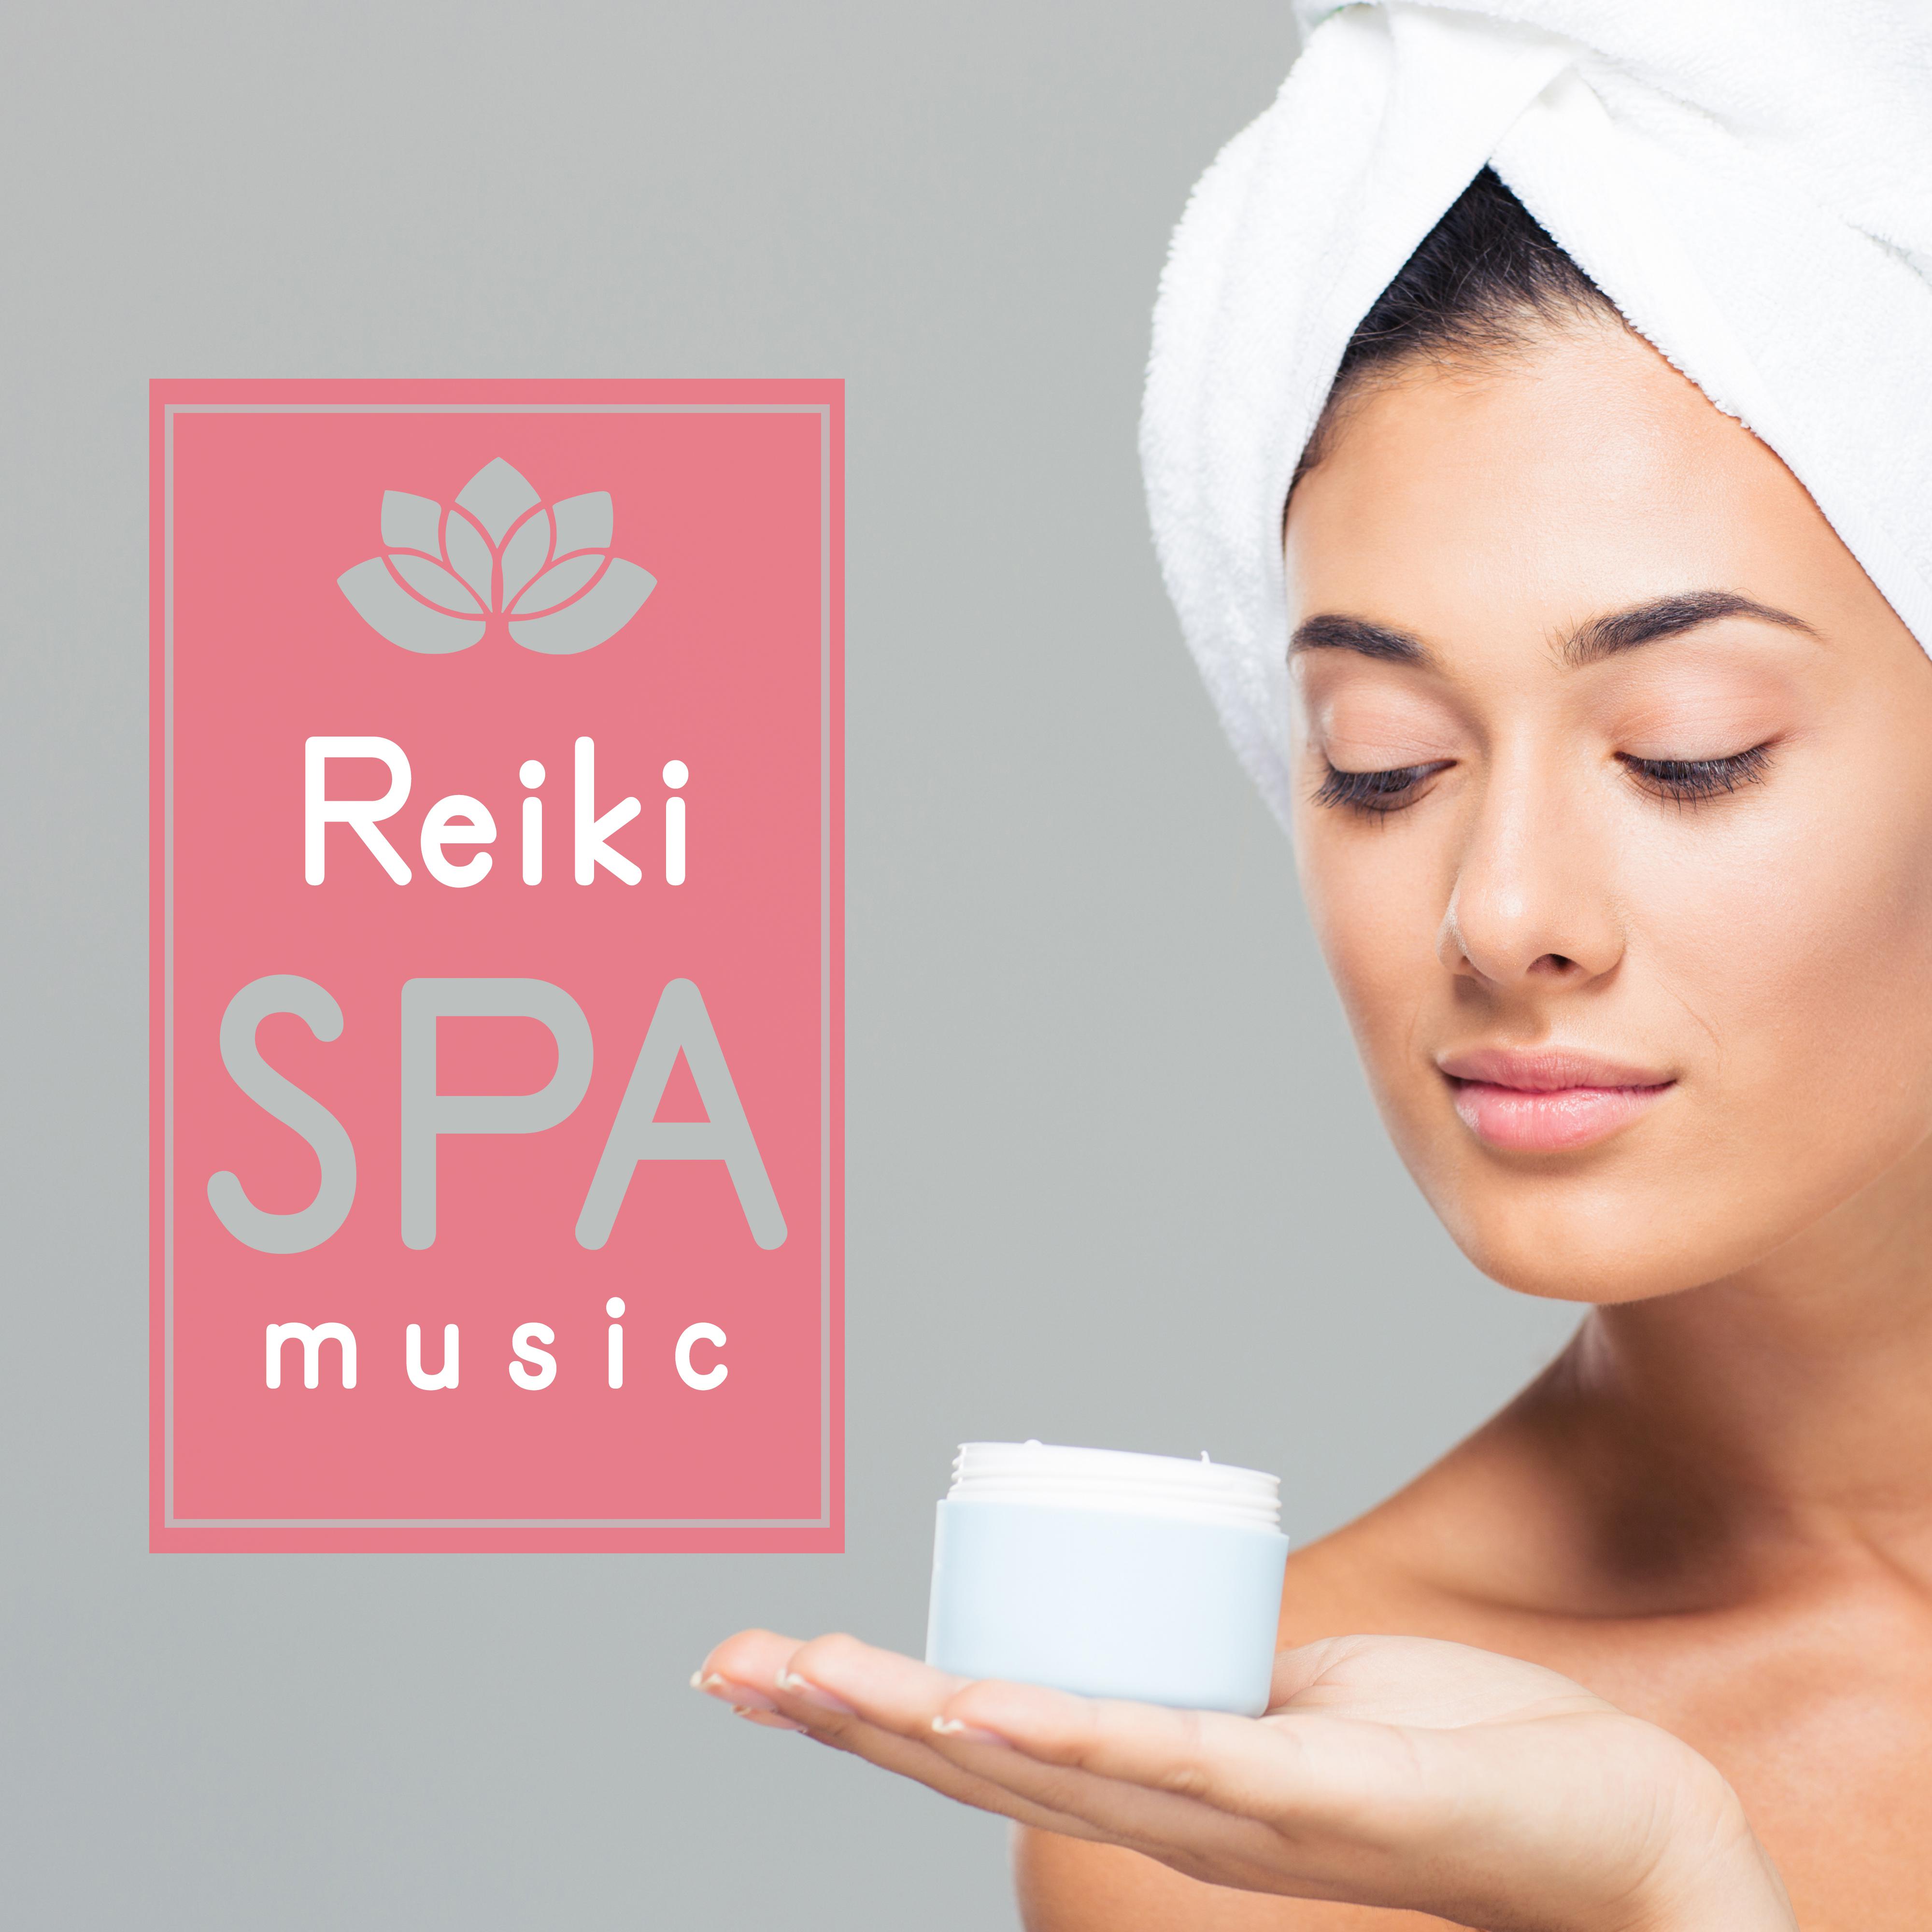 Reiki Spa Music  Greatest Nature Sounds of Birds and Ocean Waves, Relaxing Music for Total Rest, Calming Sounds of New Age Music